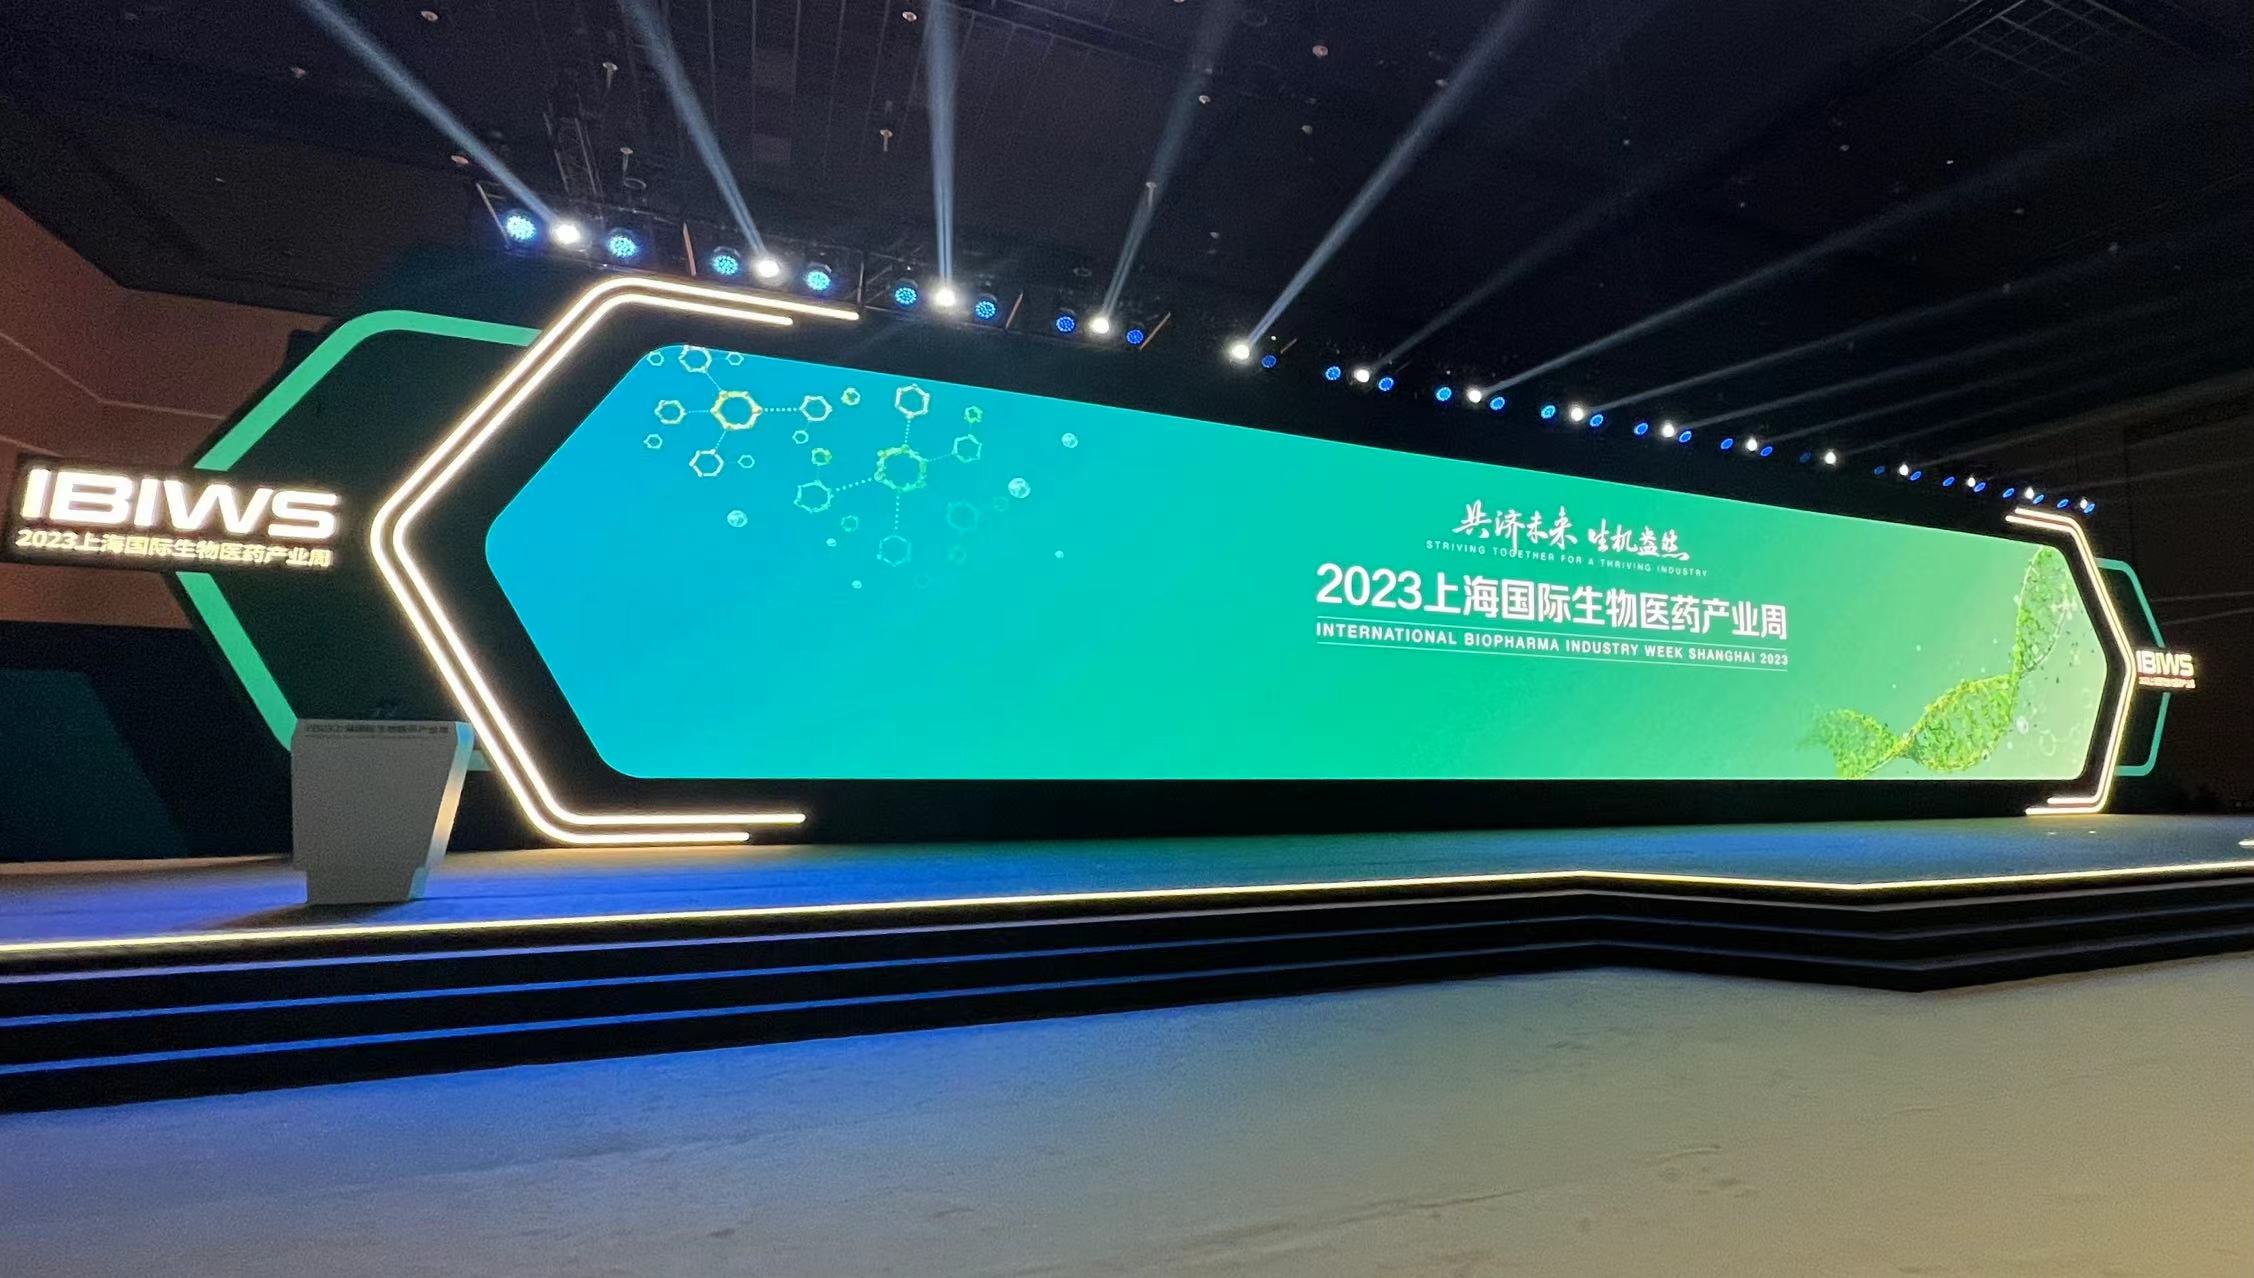 Striving Together For A Thriving Industry, International Biopharma Industry Week Shanghai 2023 Opens